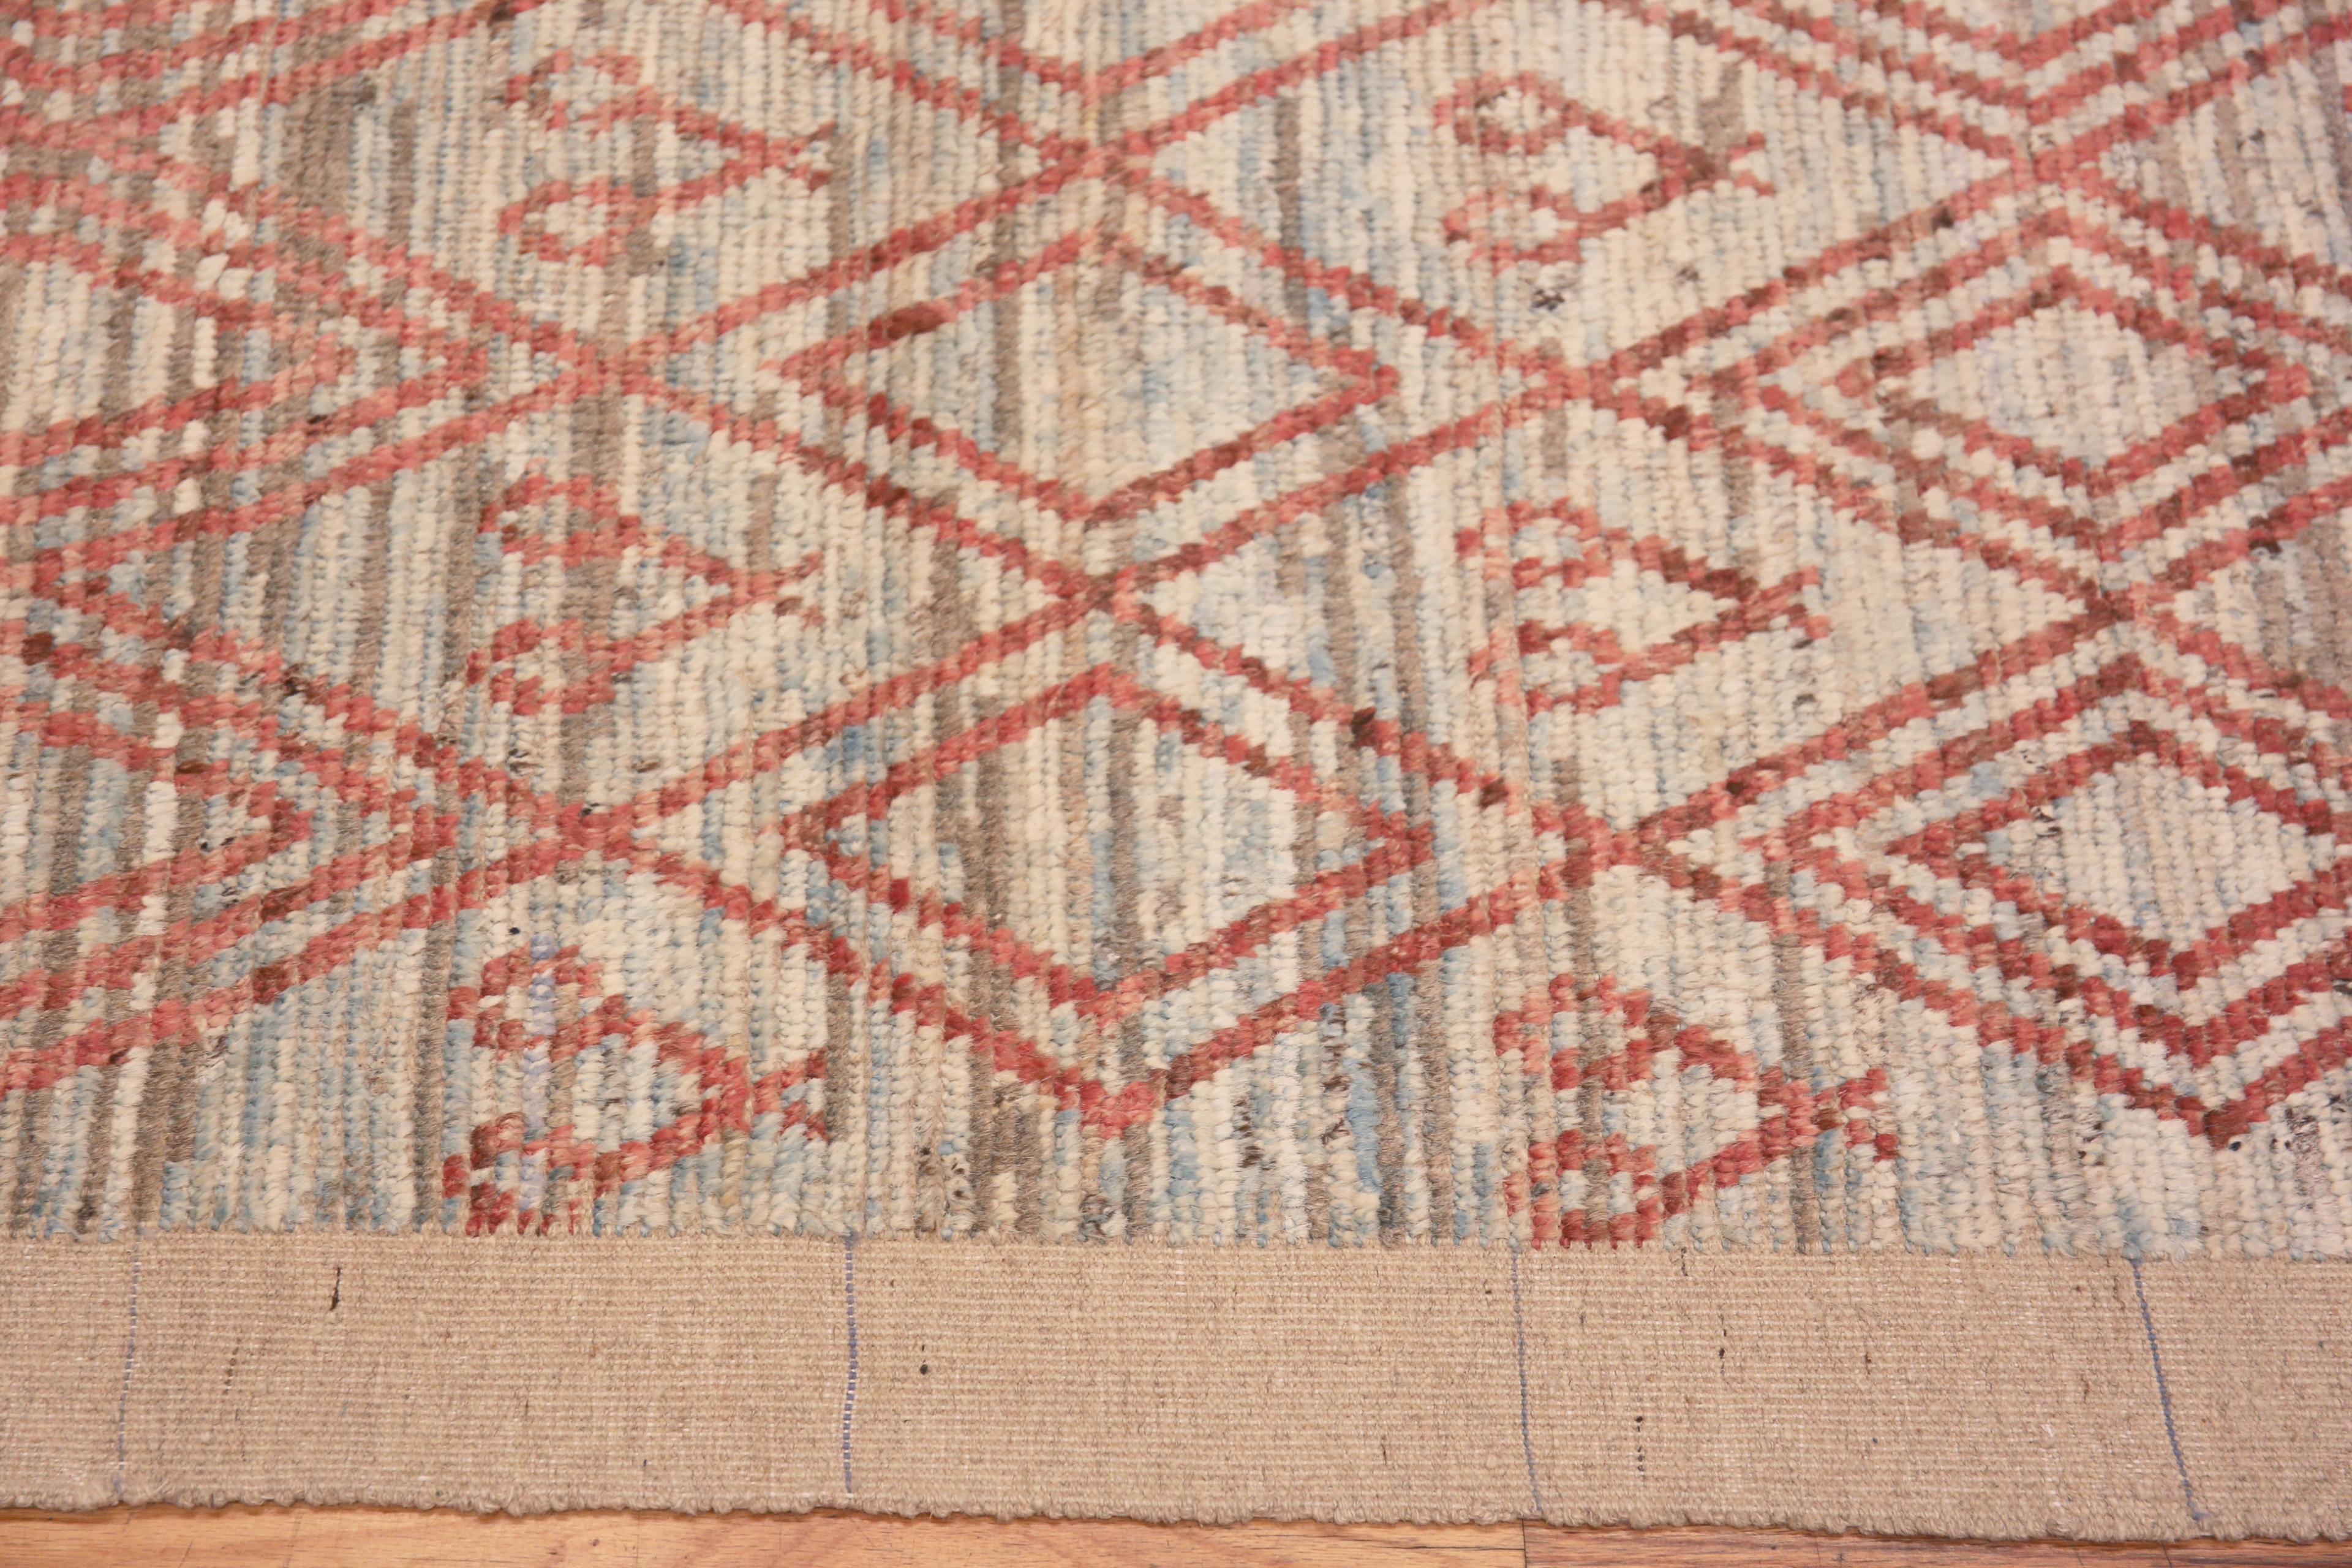 Hand-Knotted Nazmiyal Collection Rustic Tribal Geometric Diamond Pattern Runner Rug 3' x 9'9